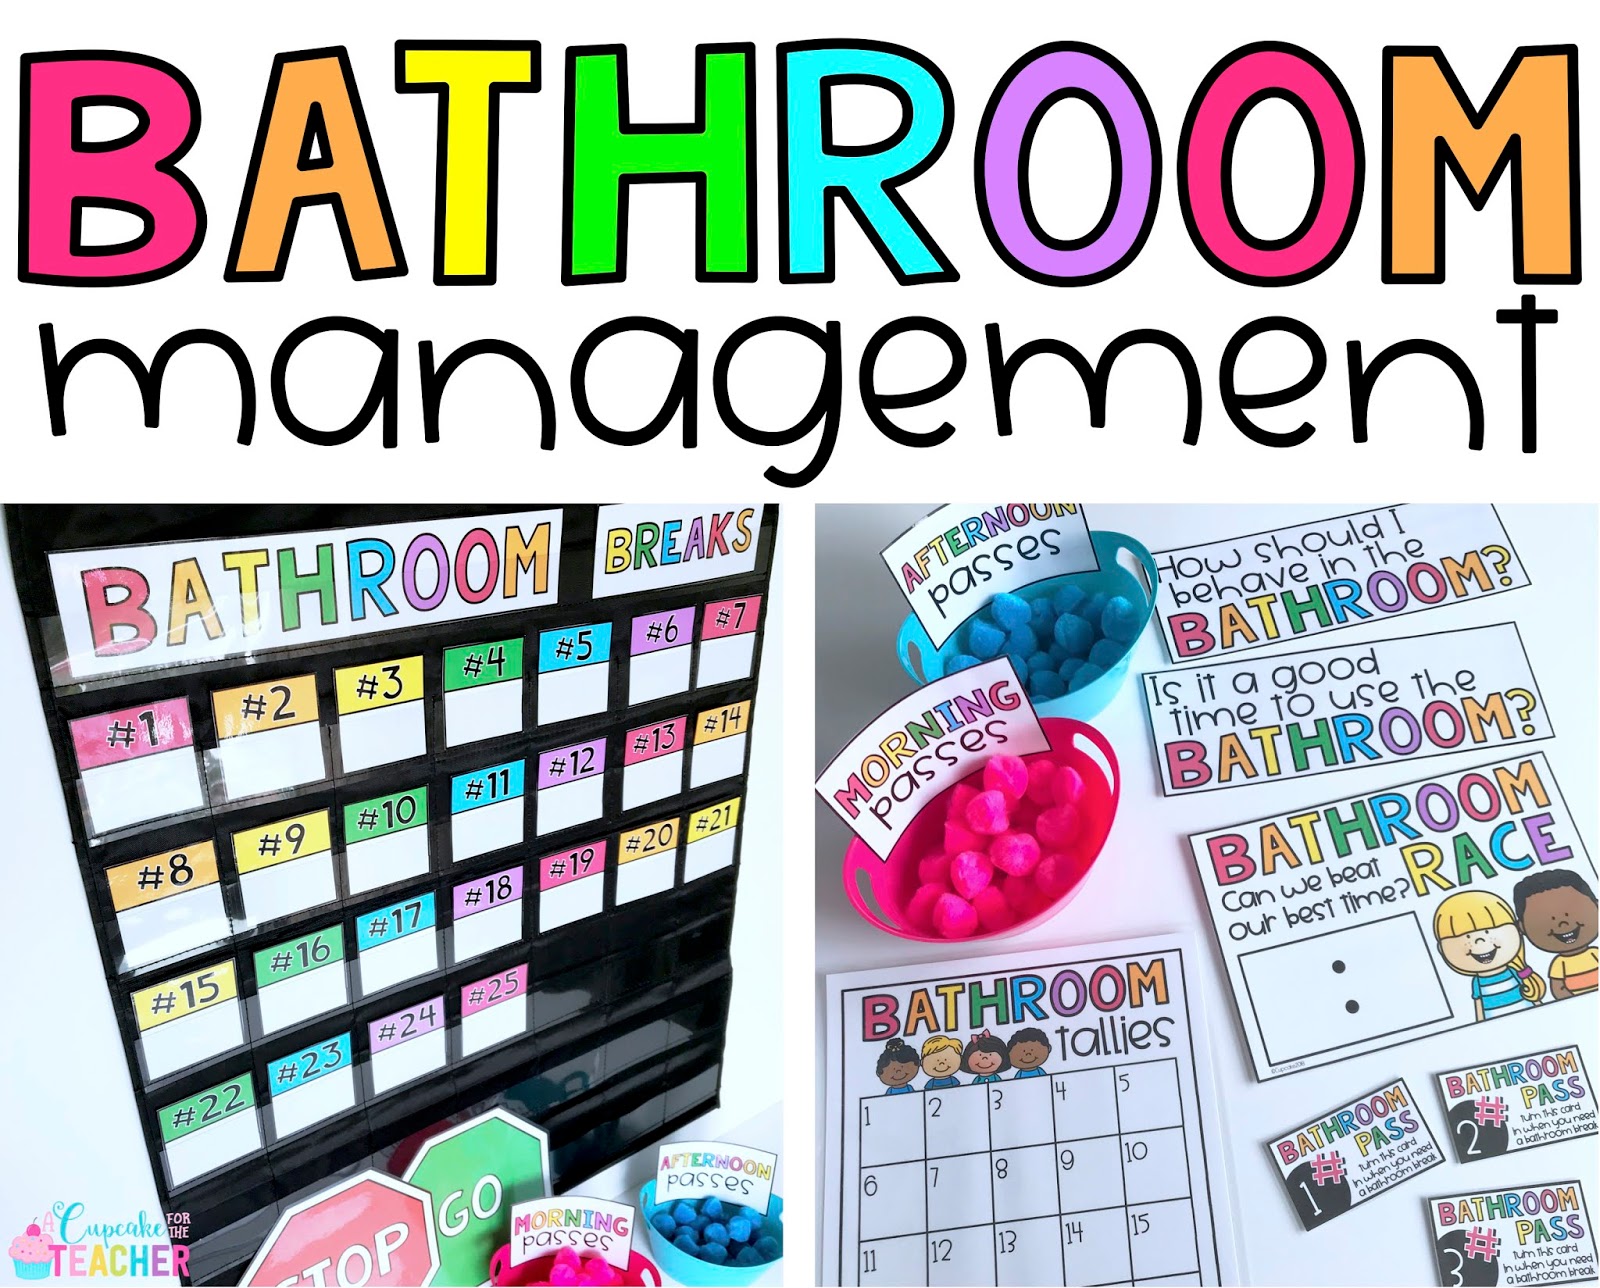 Check out these practical solutions for bathroom management in your elementary classroom!